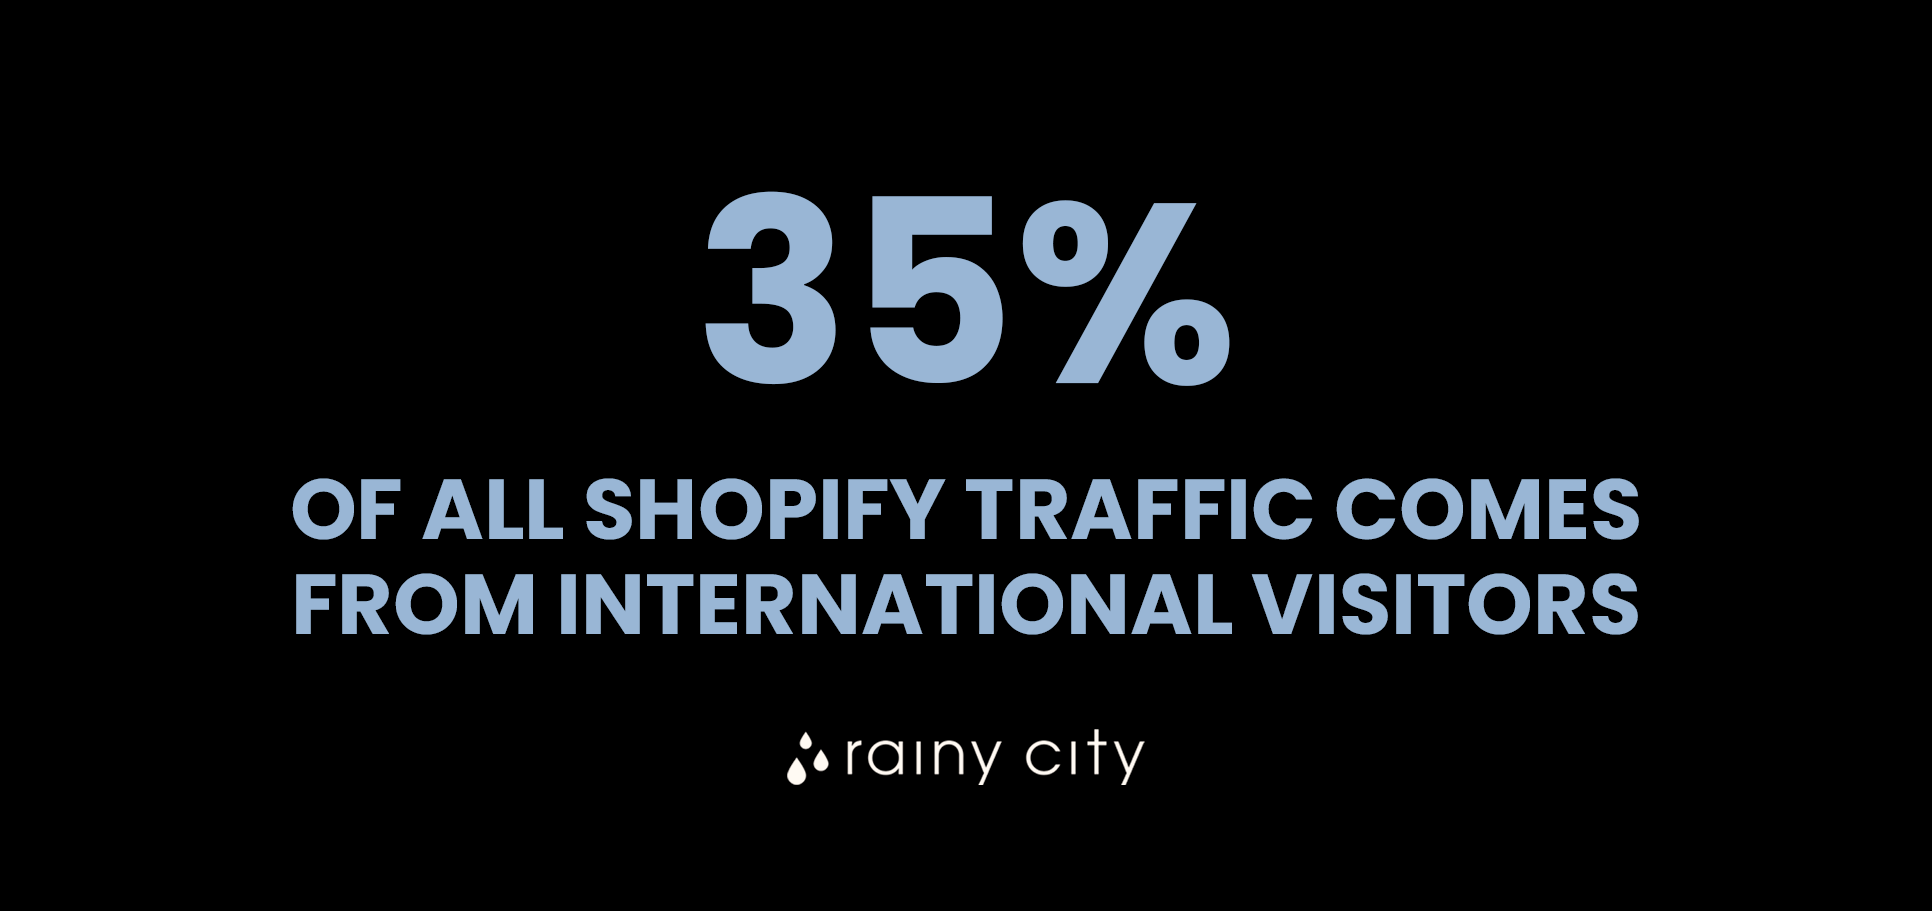 35% of all shopify traffic comes from international visitors